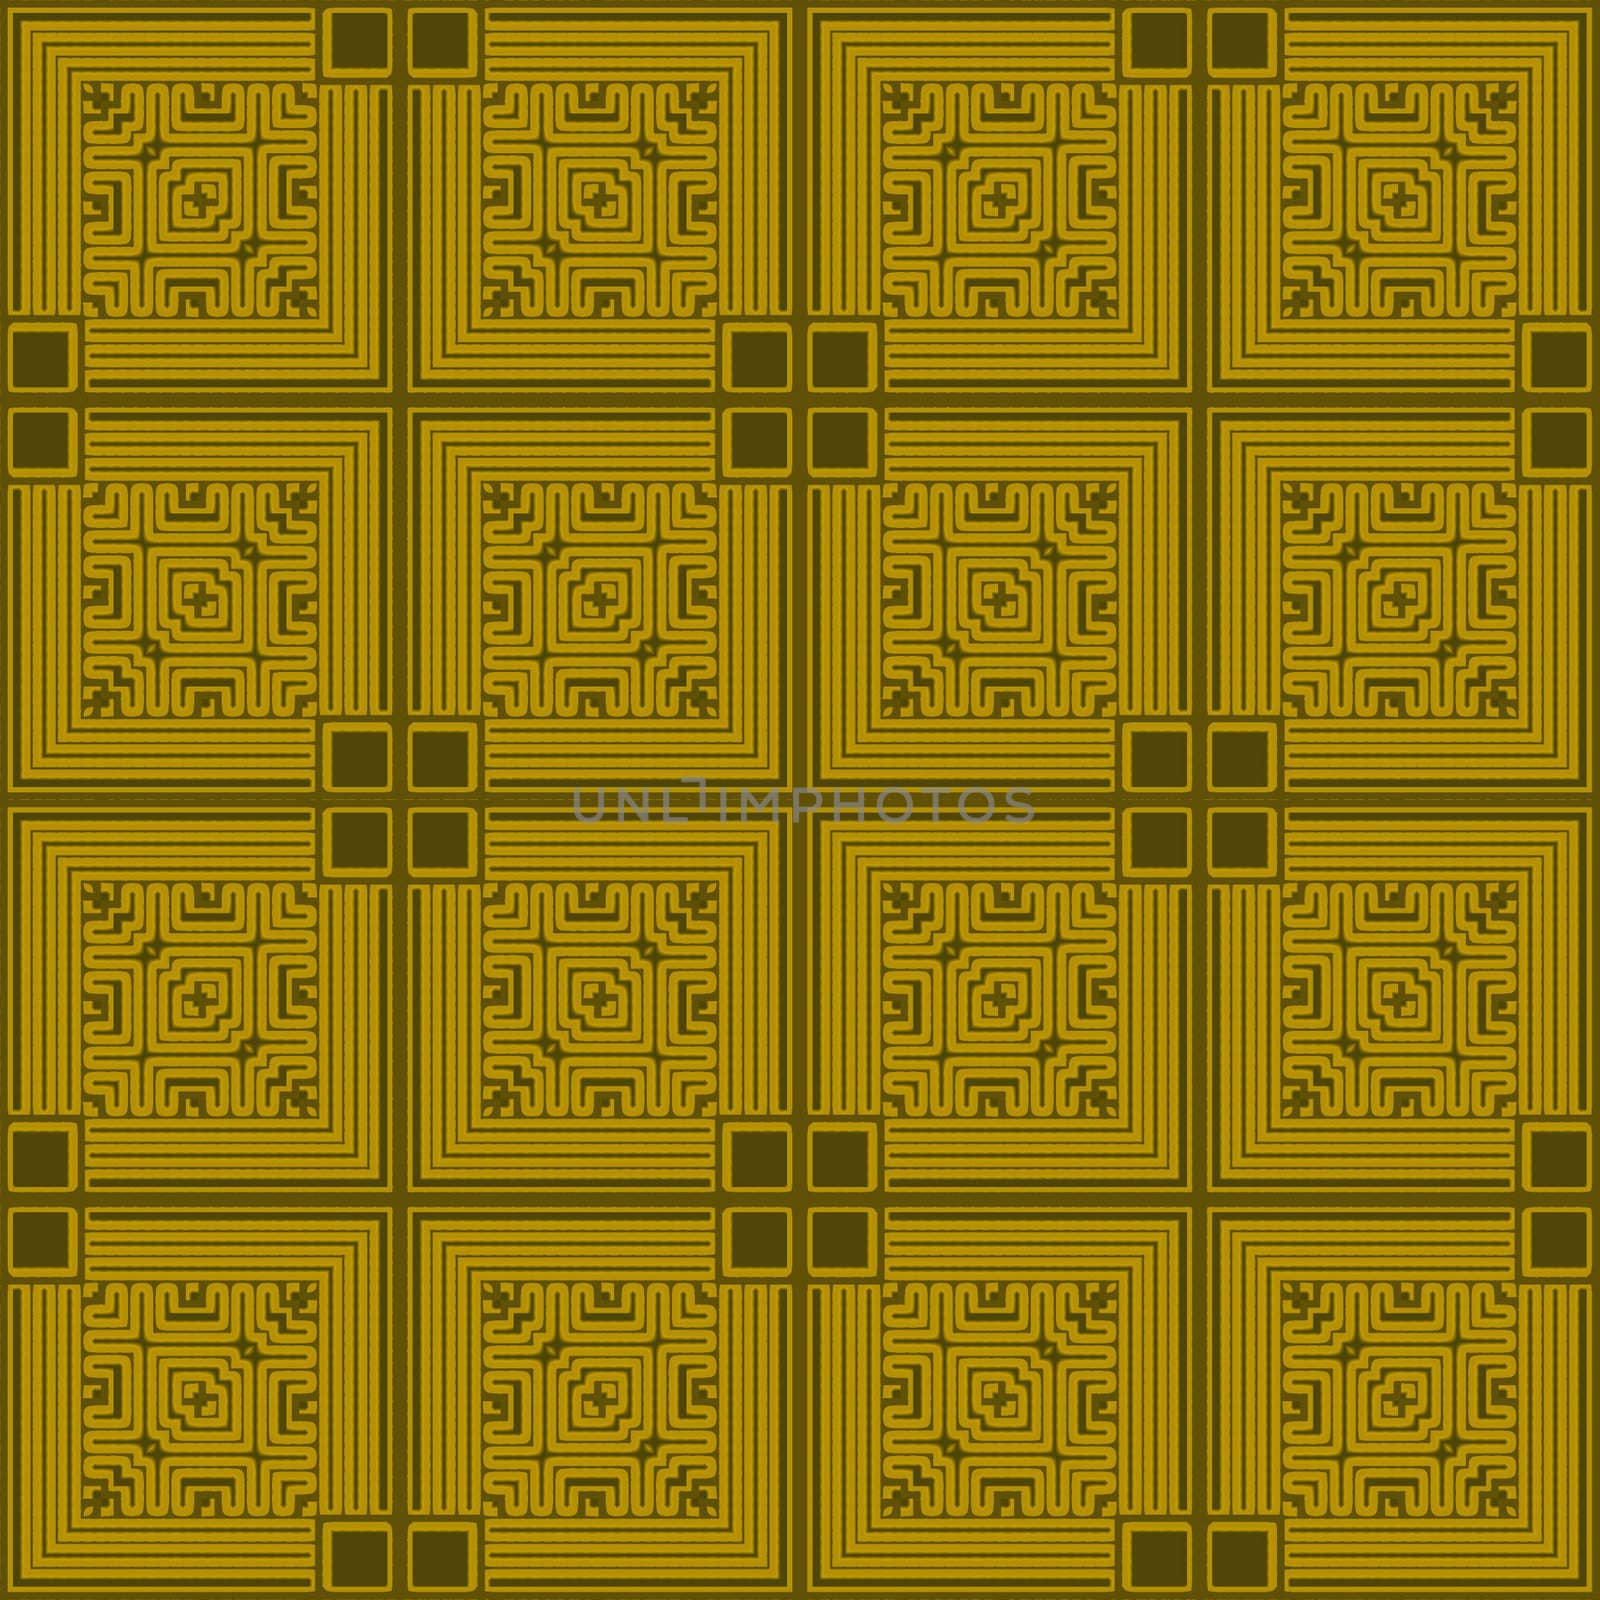 Golden square abstract tile design that seamlessly repeats